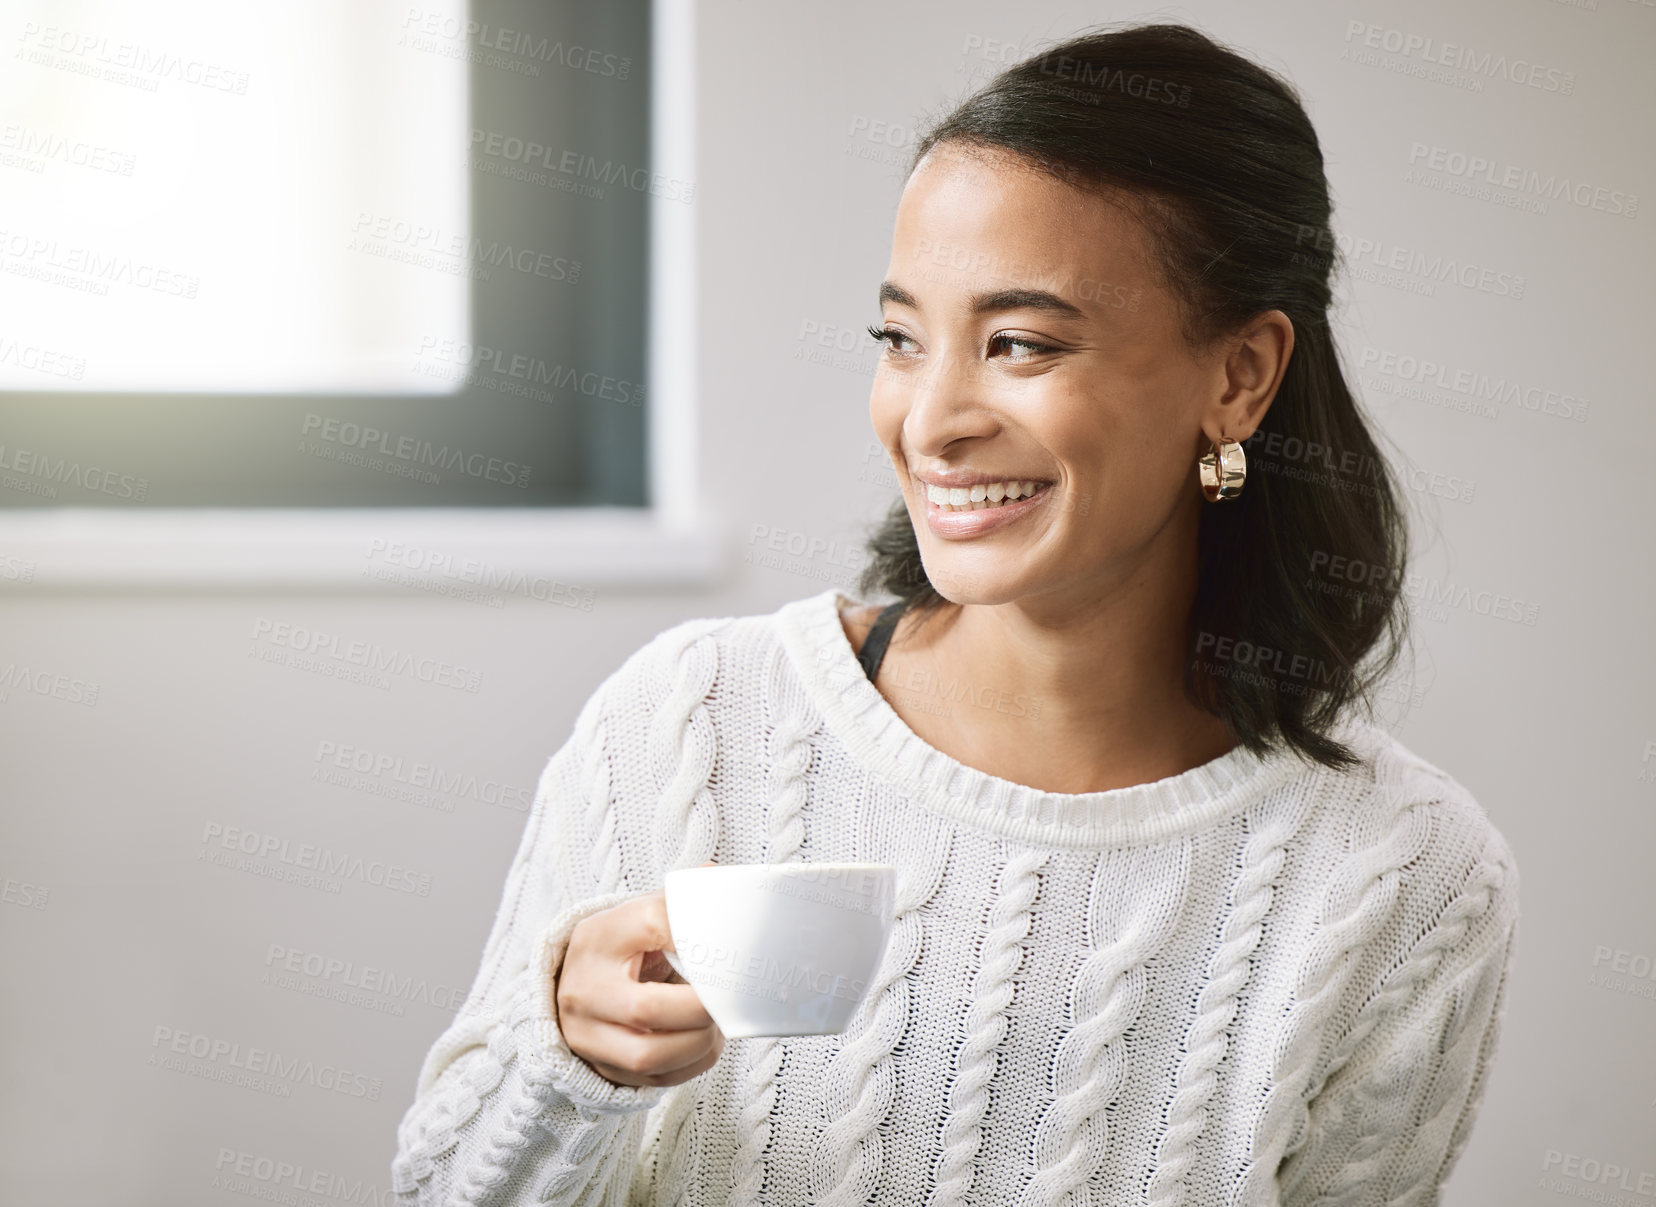 Buy stock photo Shot of an attractive young woman sitting alone in her new home and enjoying a cup of tea